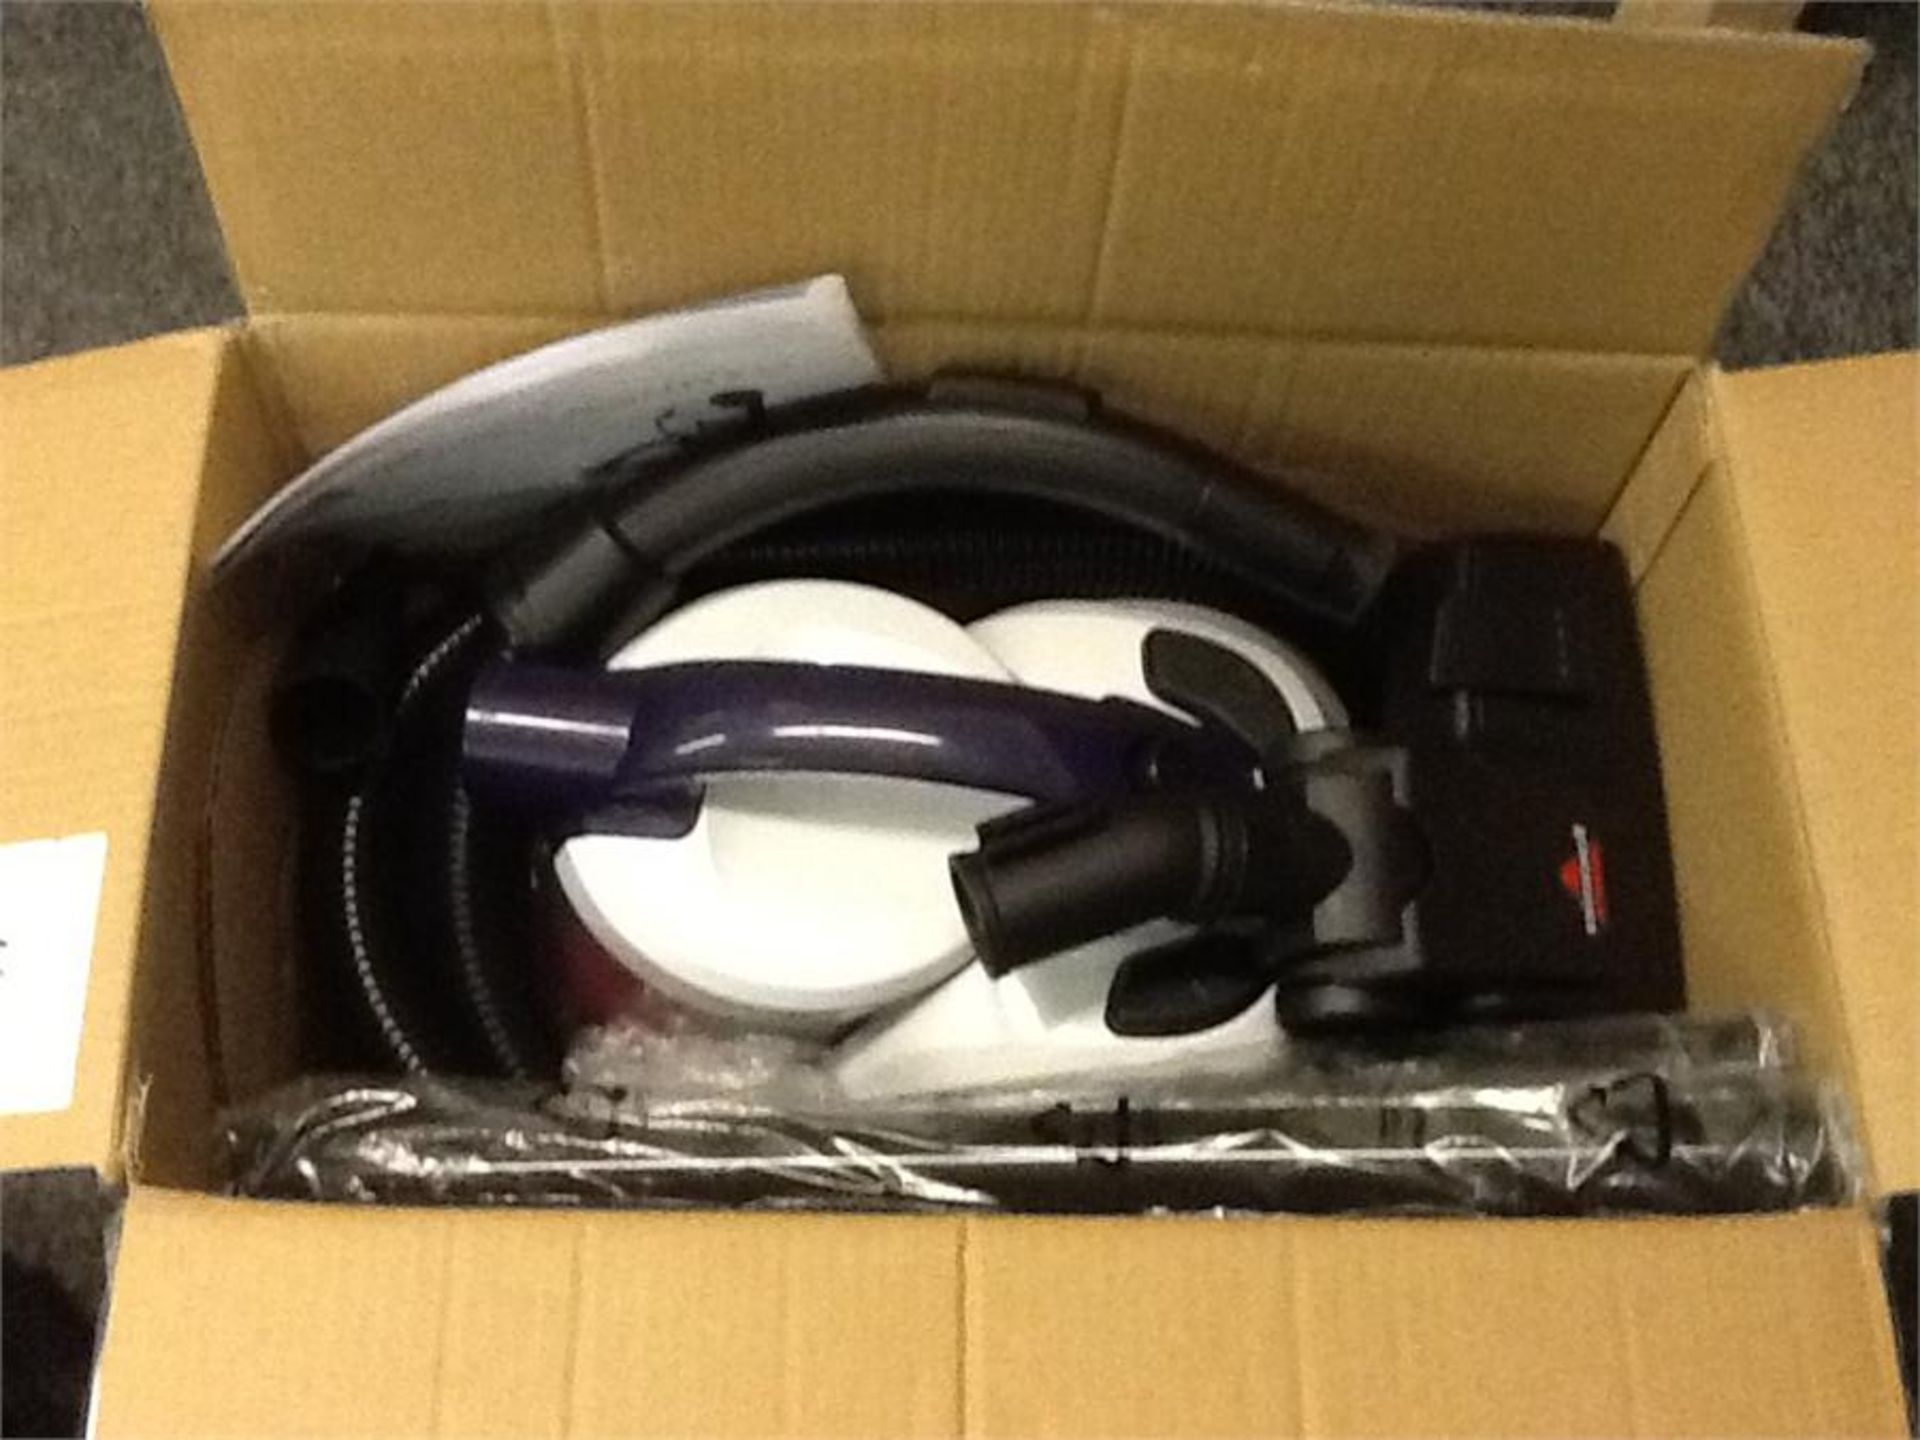 Bissell clearview compact vacume cleaner. Working boxed